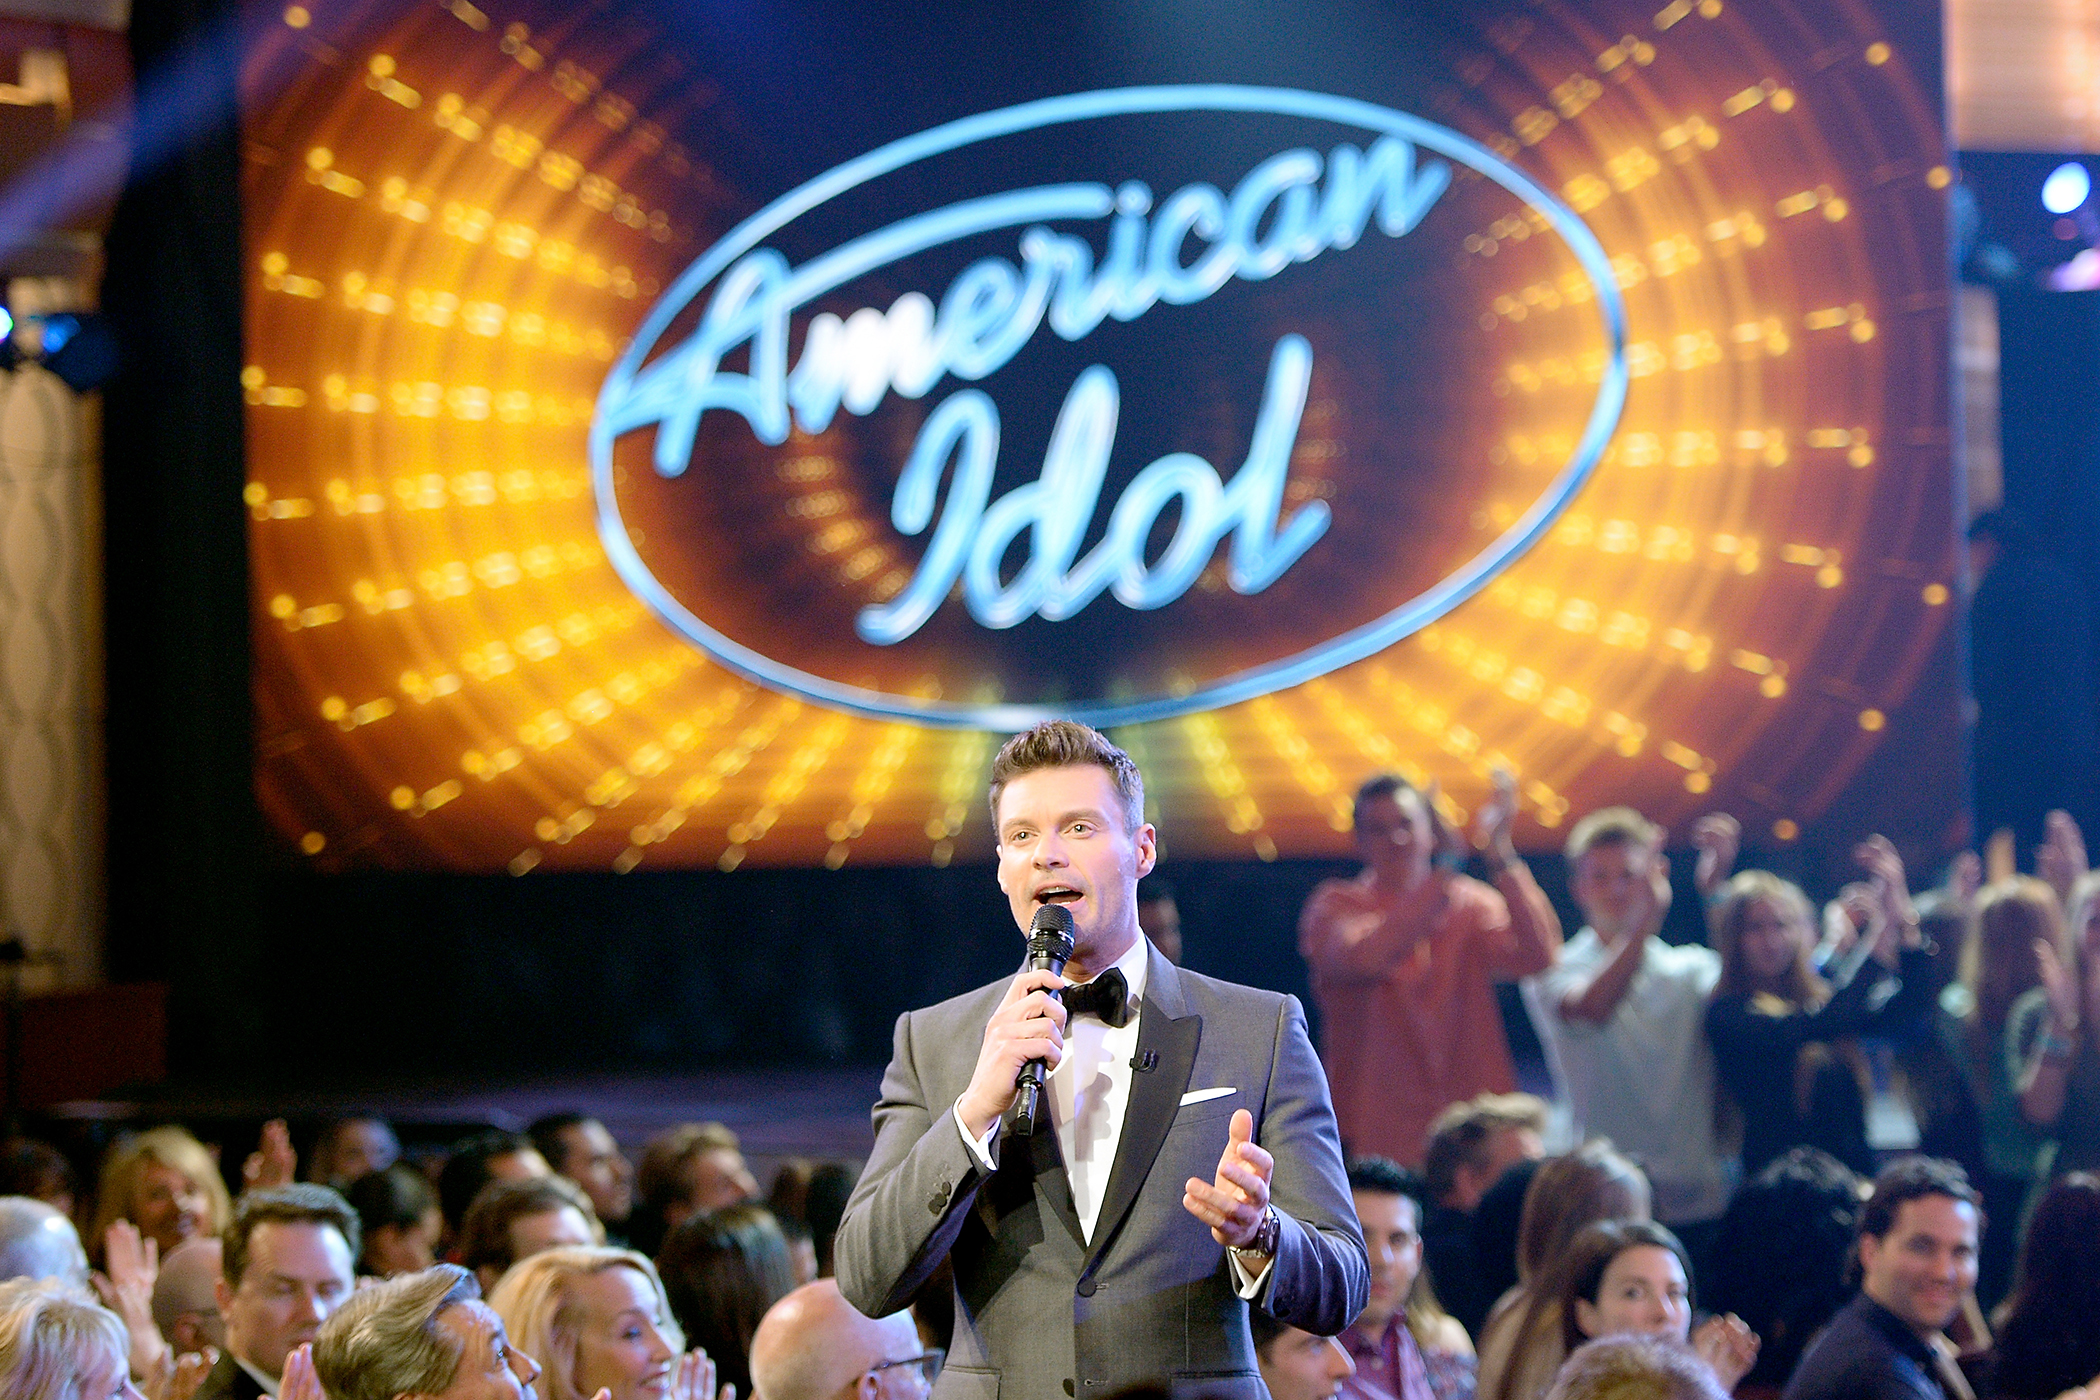 170501-ryan-seacrest-productions-american-idol-television